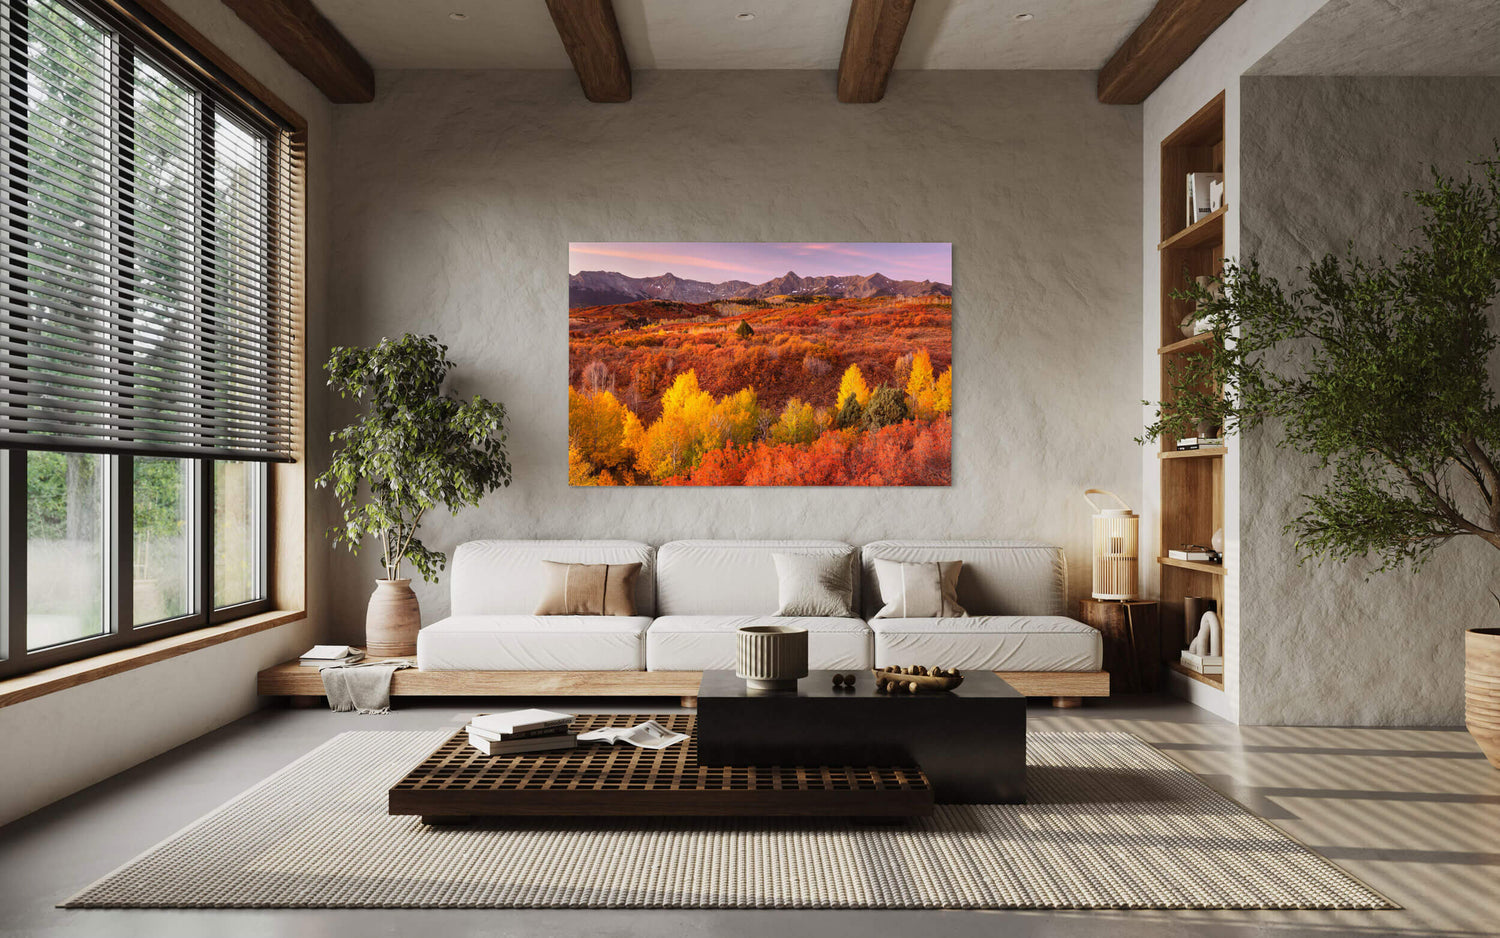 A piece of Telluride art showing a Dallas Divide fall colors picture hangs in a living room.